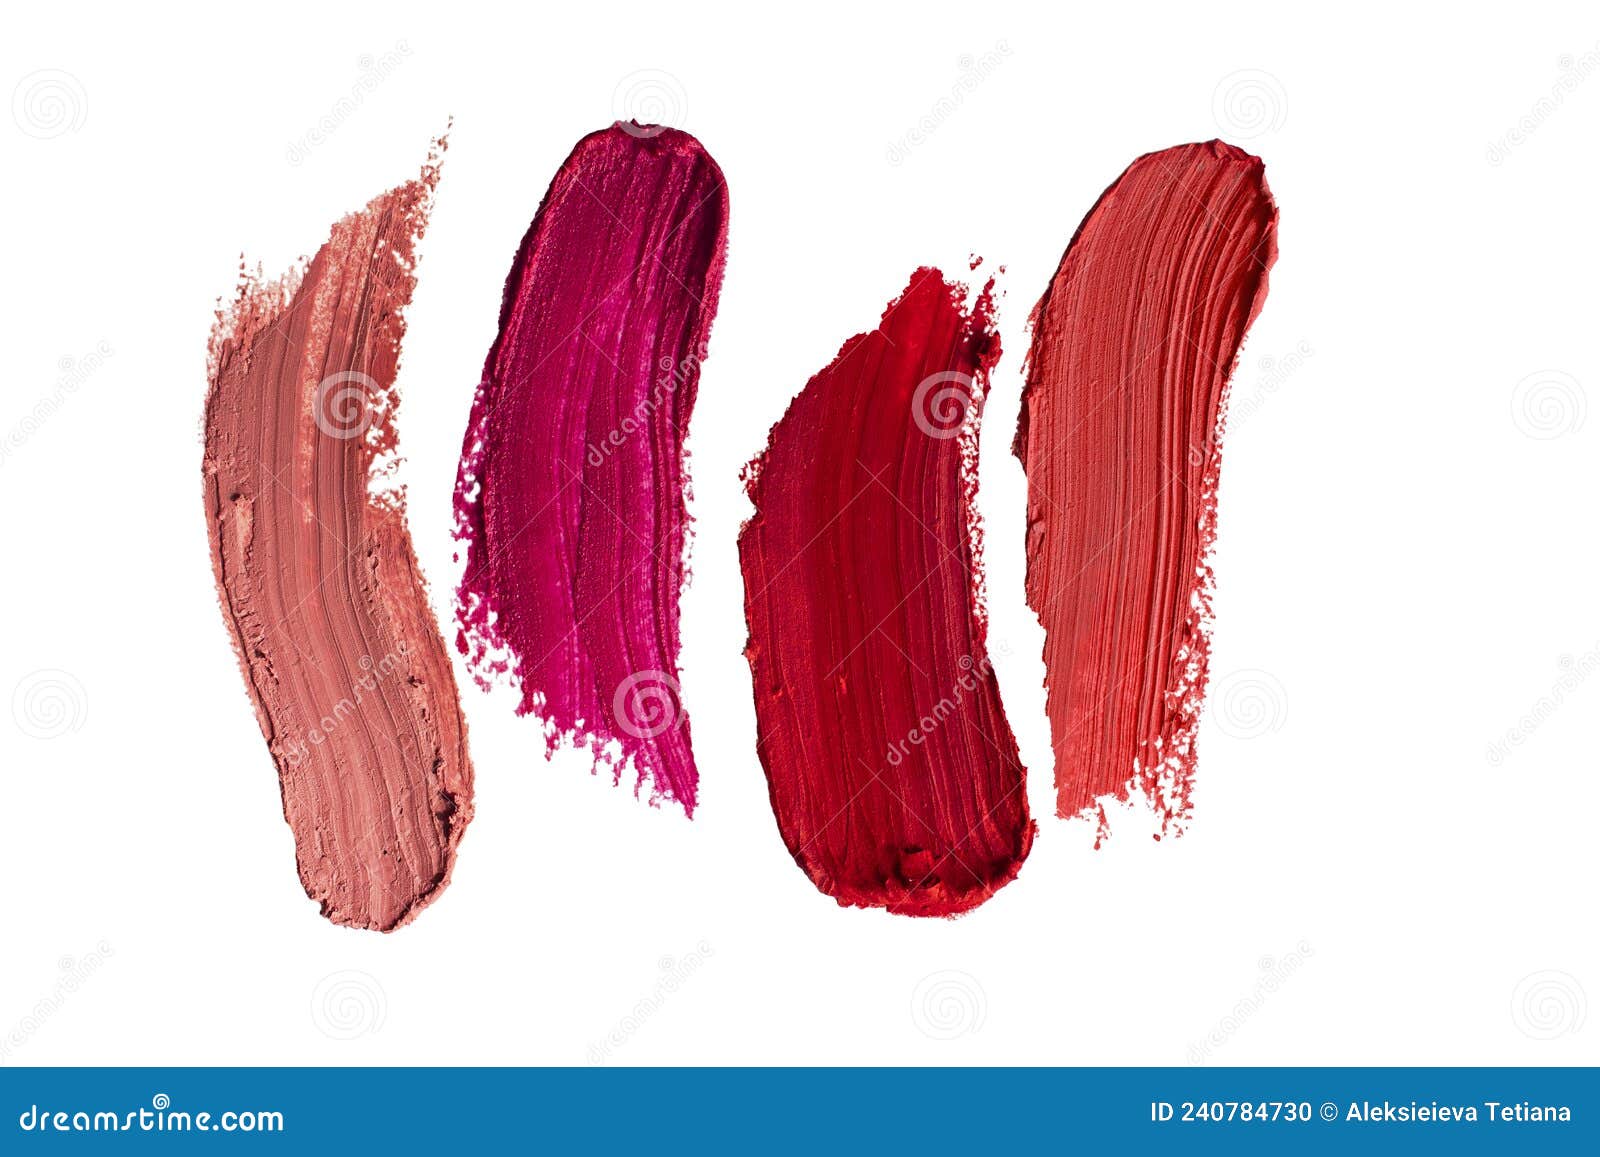 lipstick smear smudge swatch  on white background. colorfull red lipstick texture